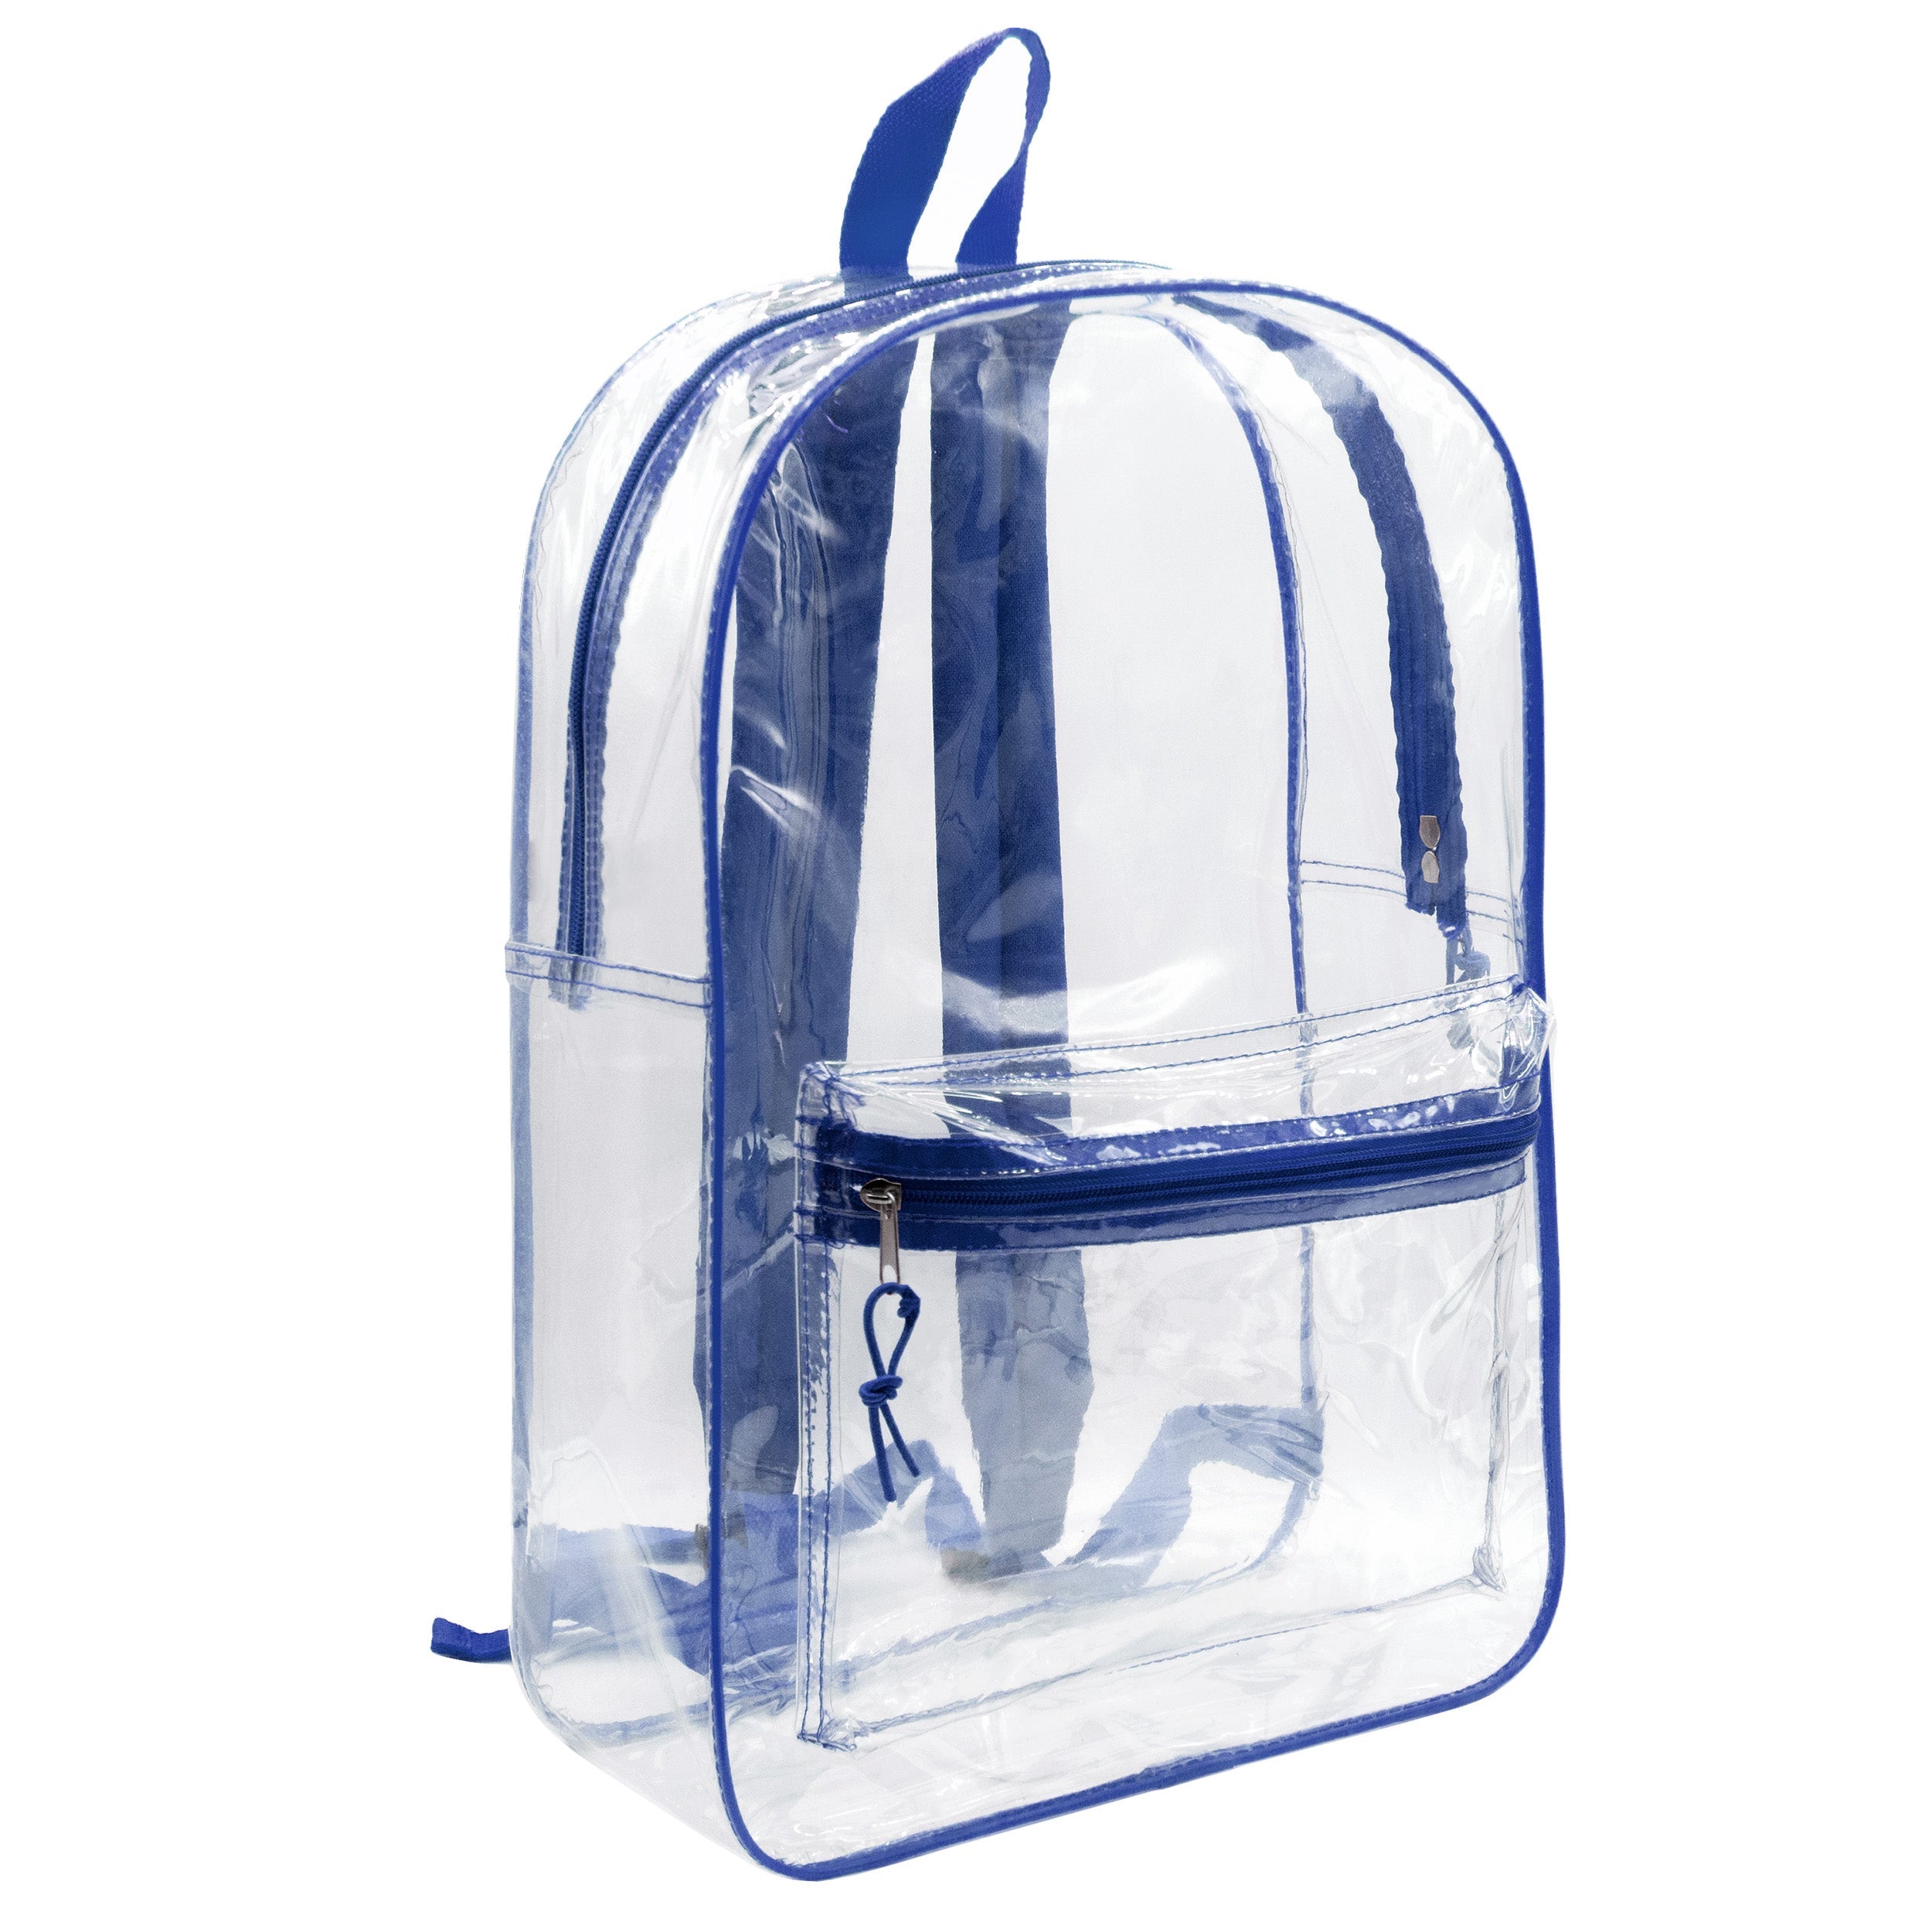 17" Clear Vinyl Backpacks With Assorted Color Piping - Wholesale Kit of 12